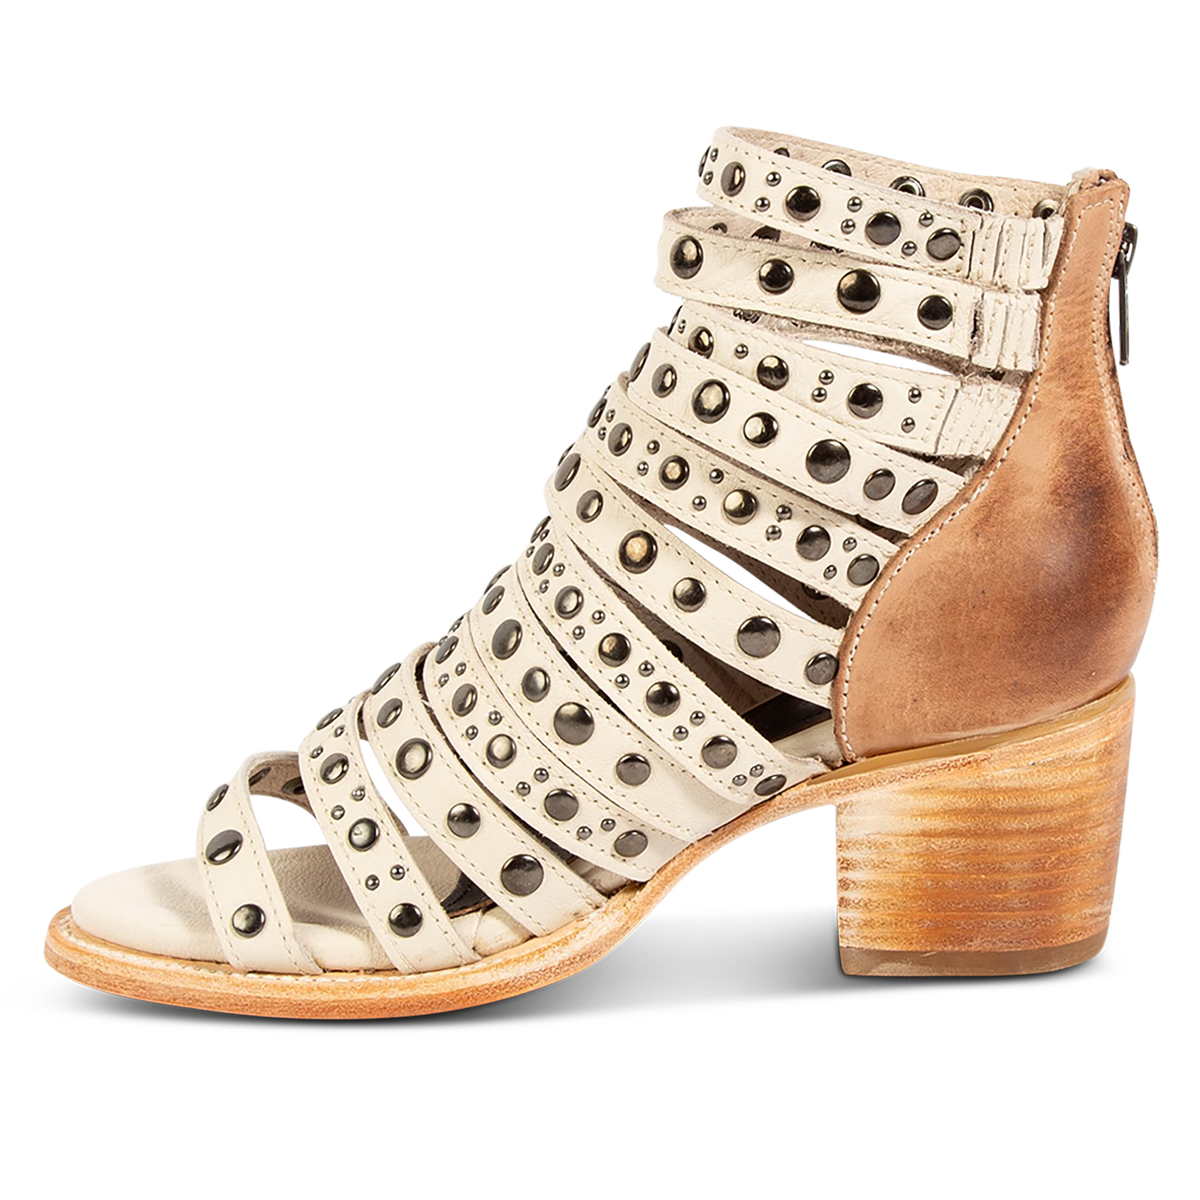 Inside view showing a stacked heel and embellished leather straps on FREEBIRD women's Cannes beige multi leather sandal 